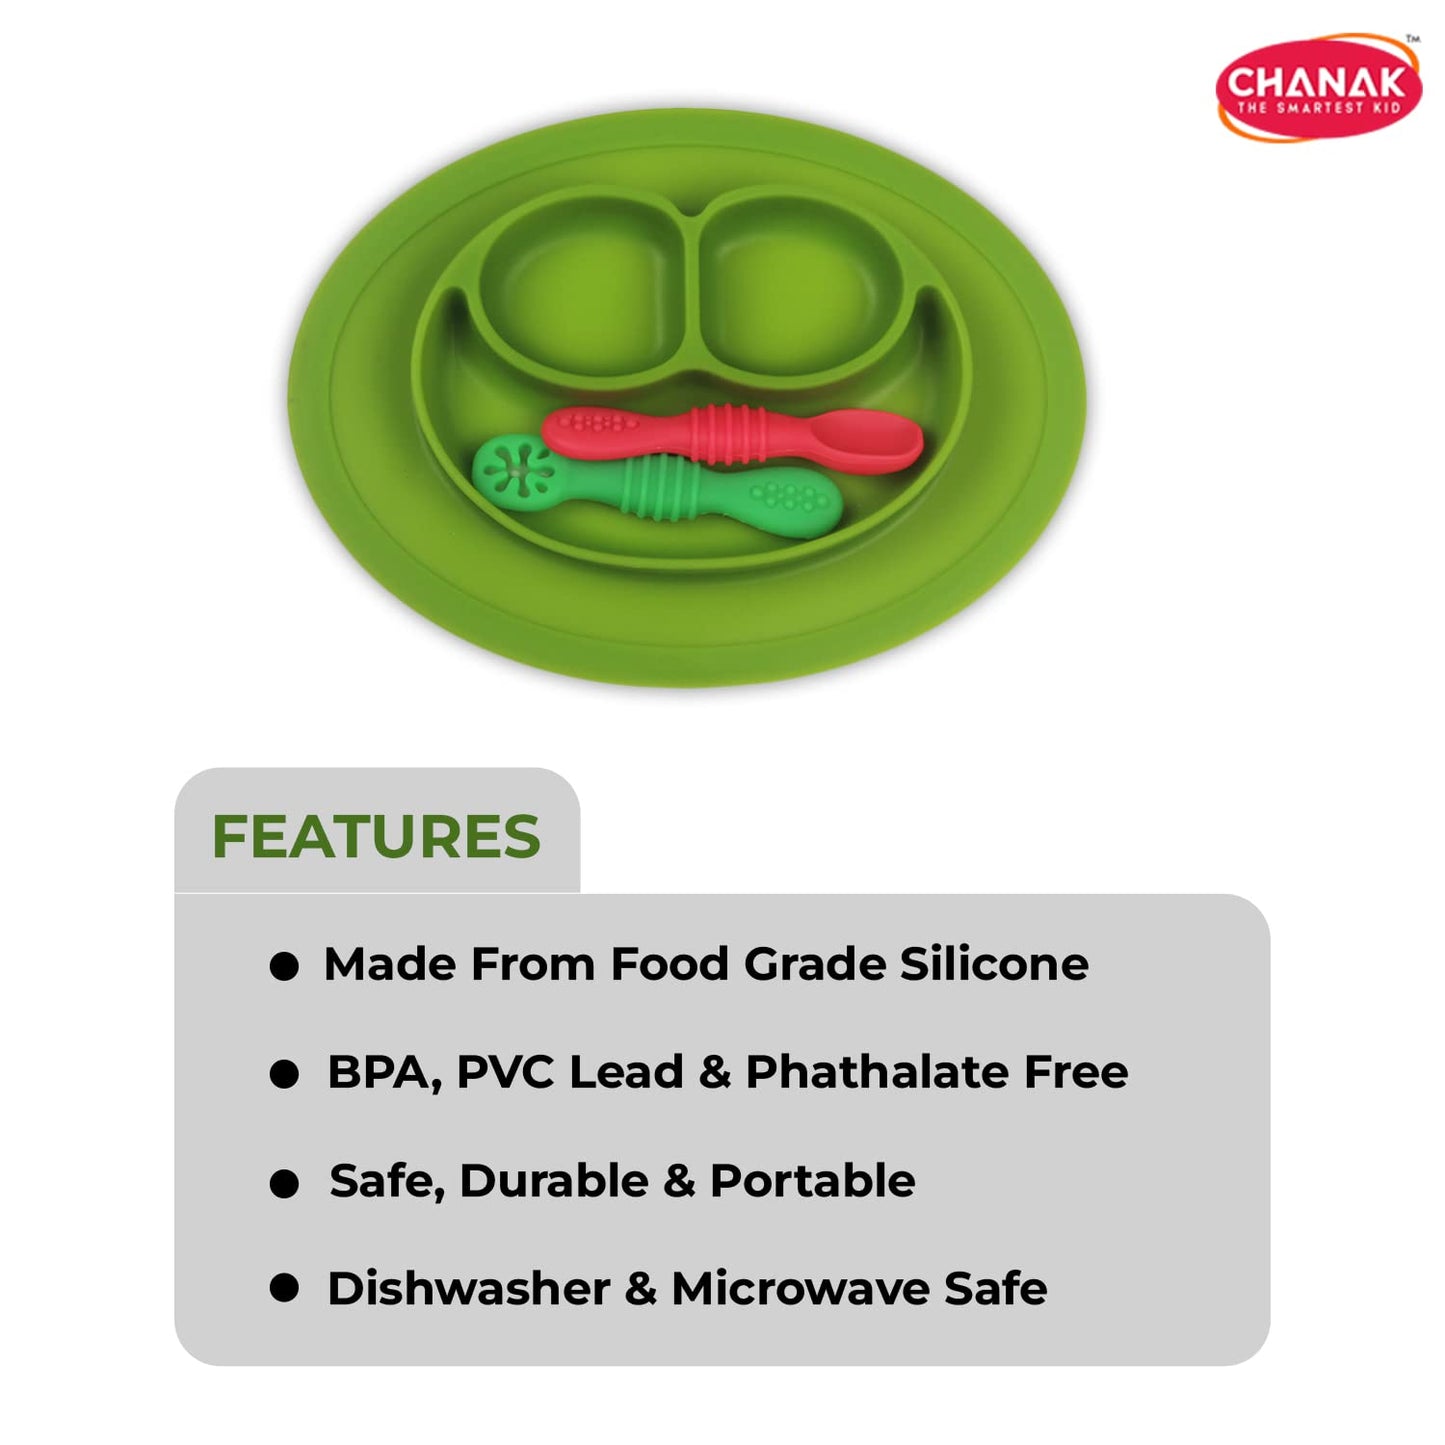 Chanak Baby Food Oval Tray - Silicon Plate with Multiple Compartments & Two Spoons (Dark Green)